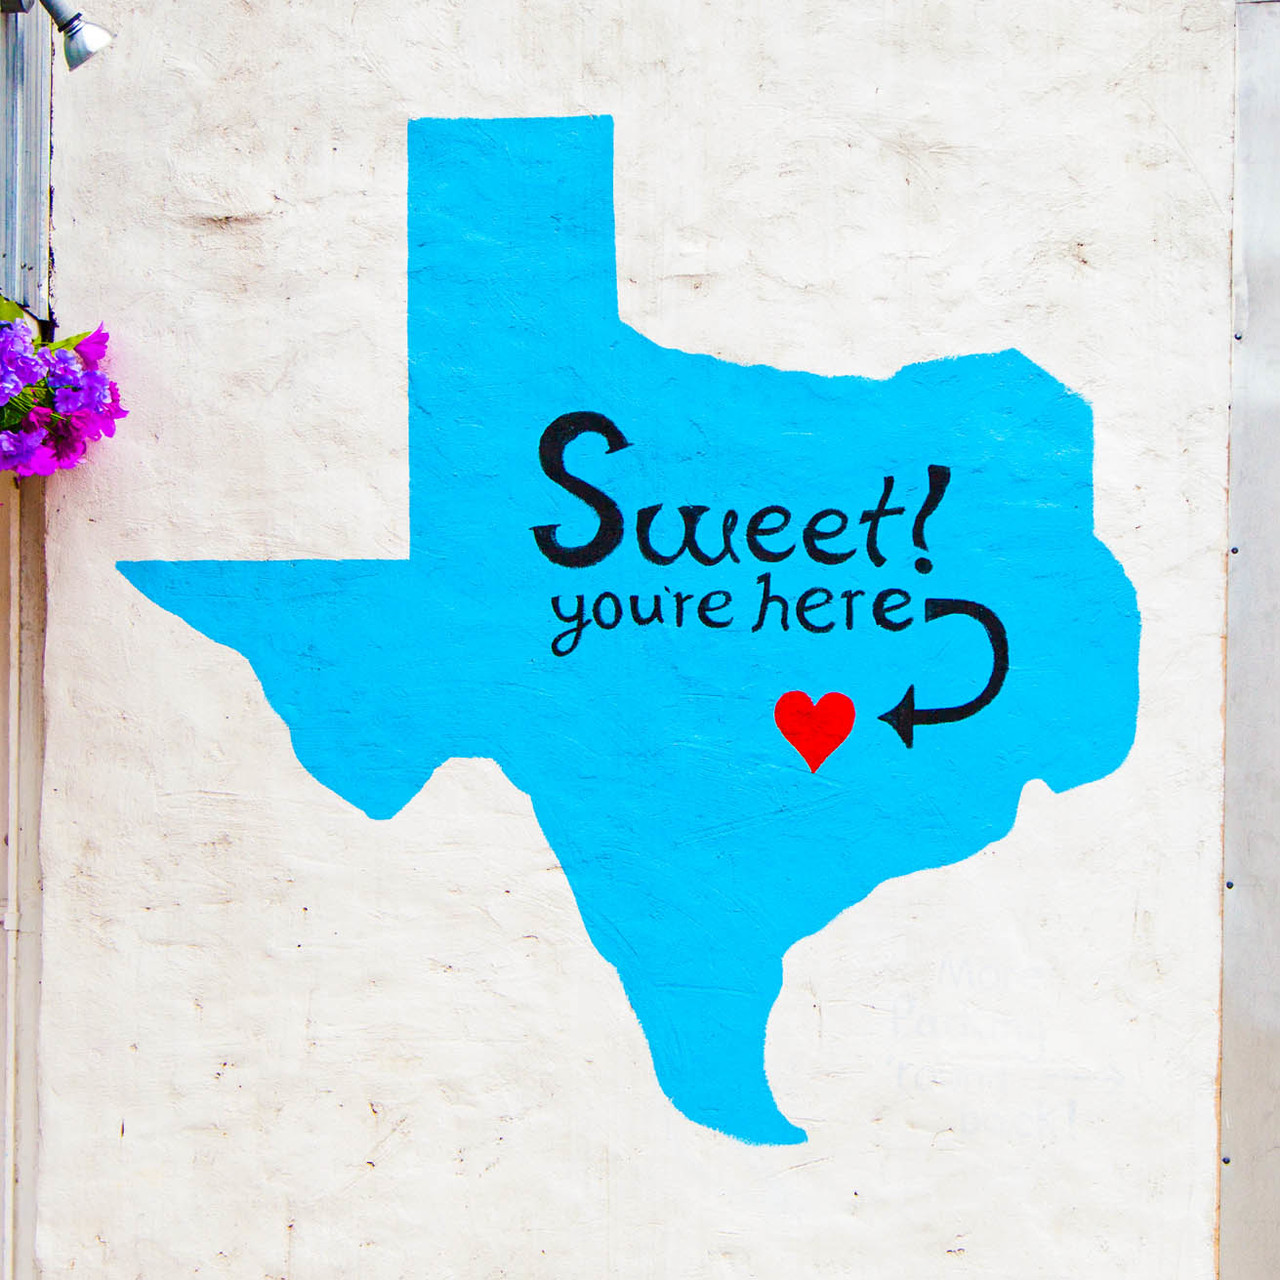 Sweet you are here mural Austin, Texas